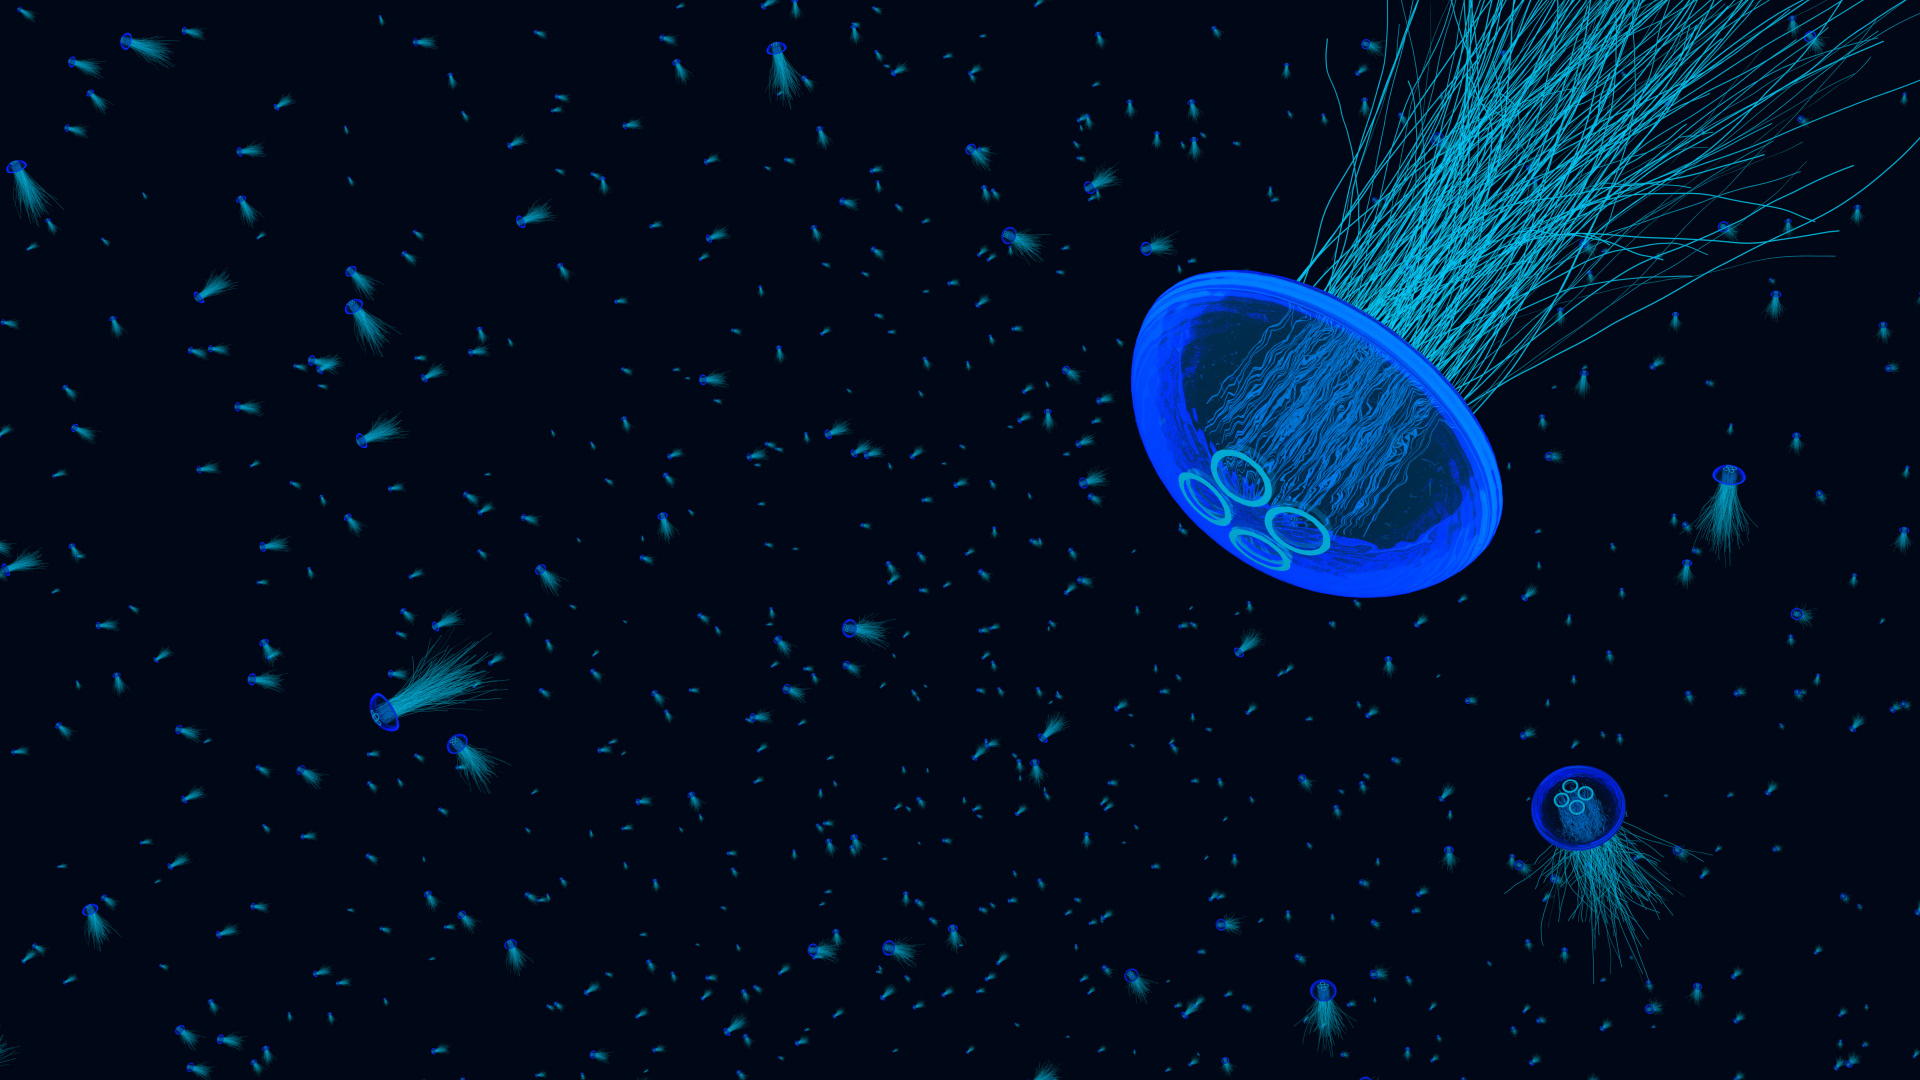 Blue Jellyfish in Water During Daytime. Wallpaper in 1920x1080 Resolution